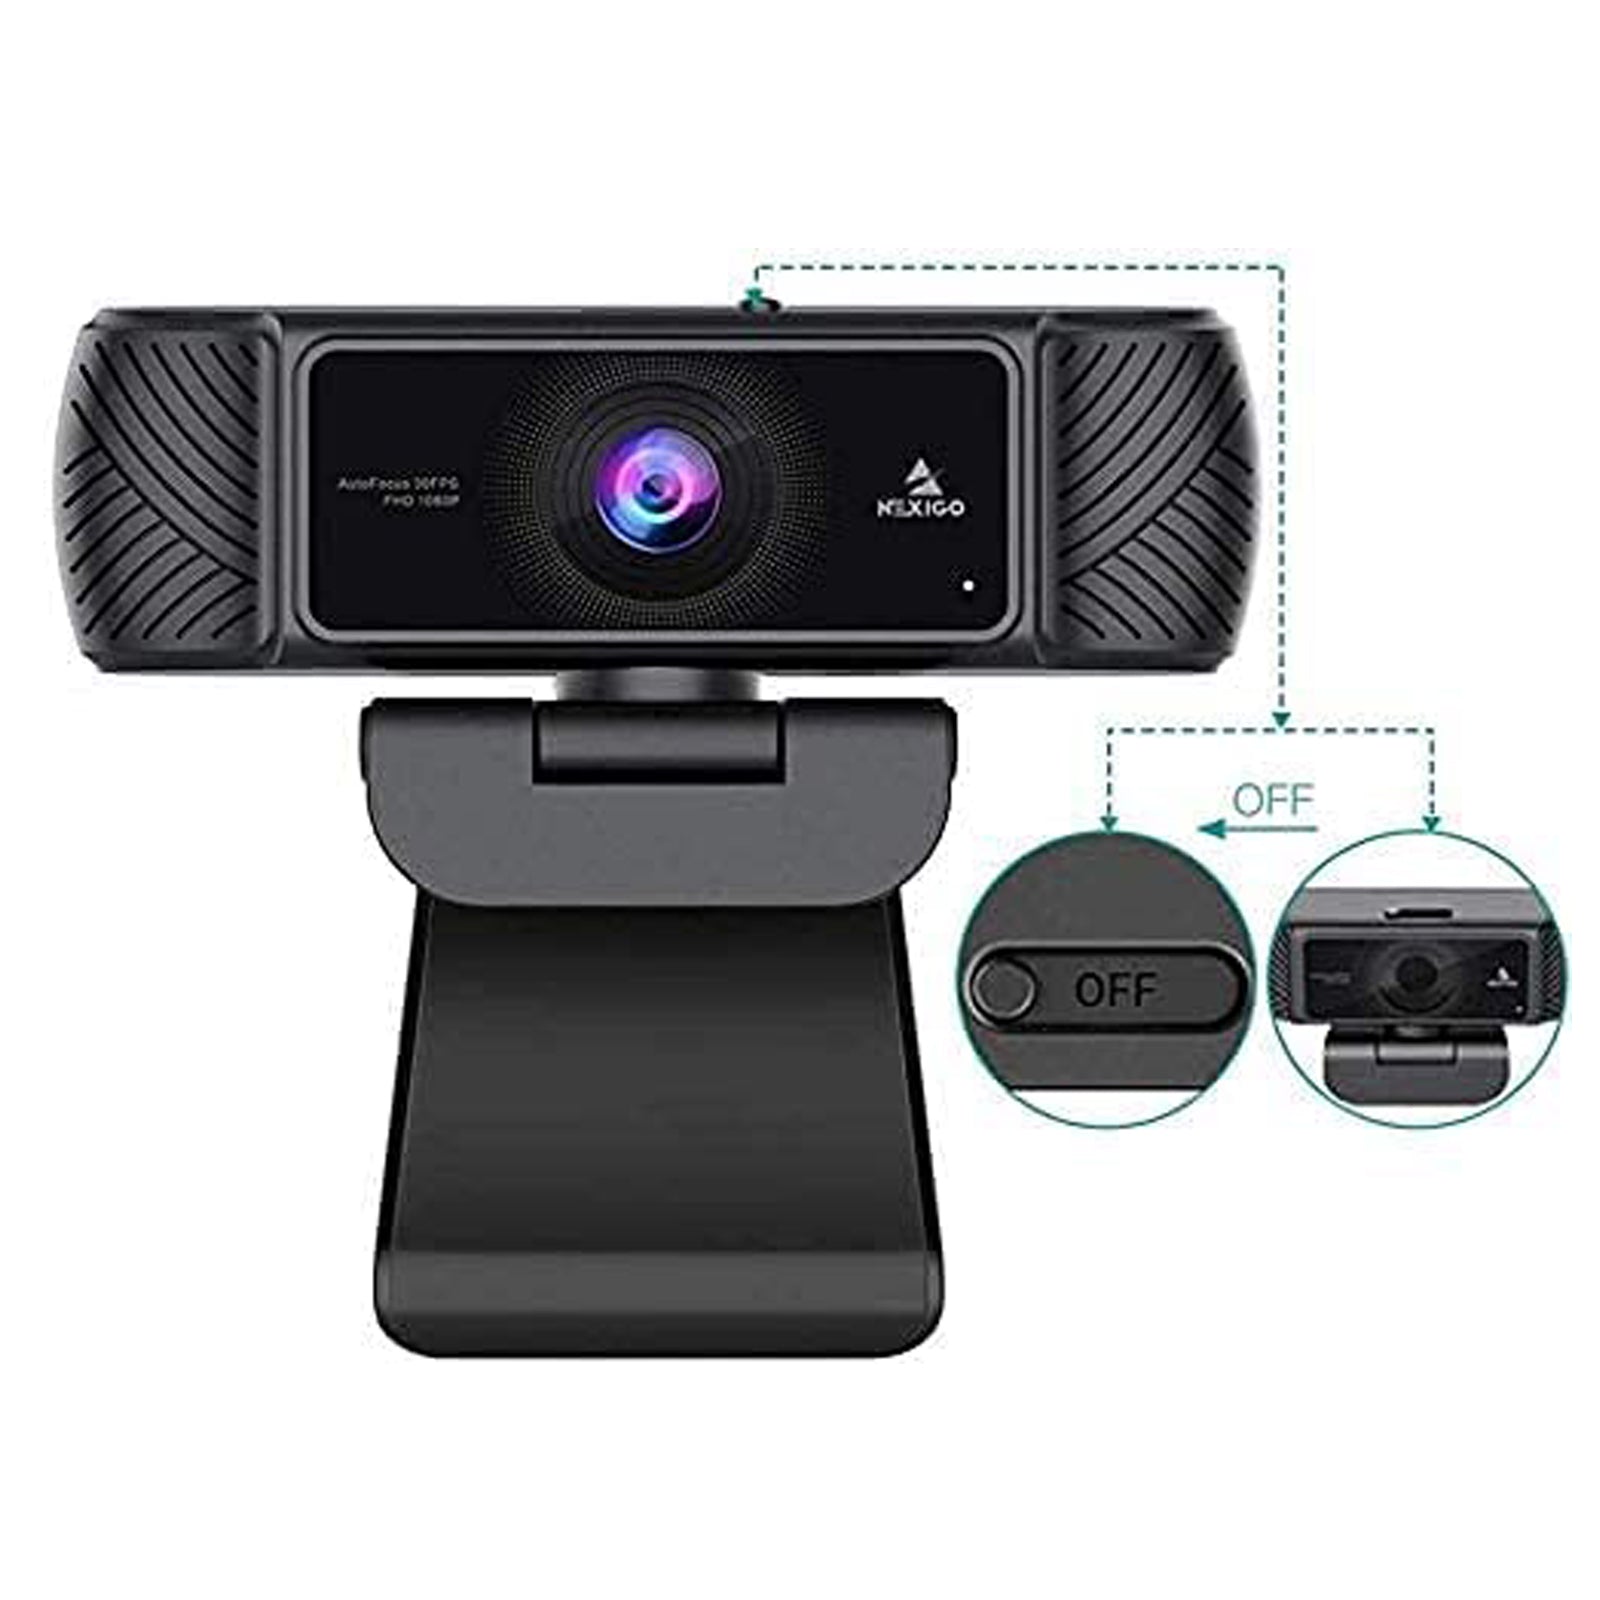 Webcam features a built-in manual privacy cover and microphone